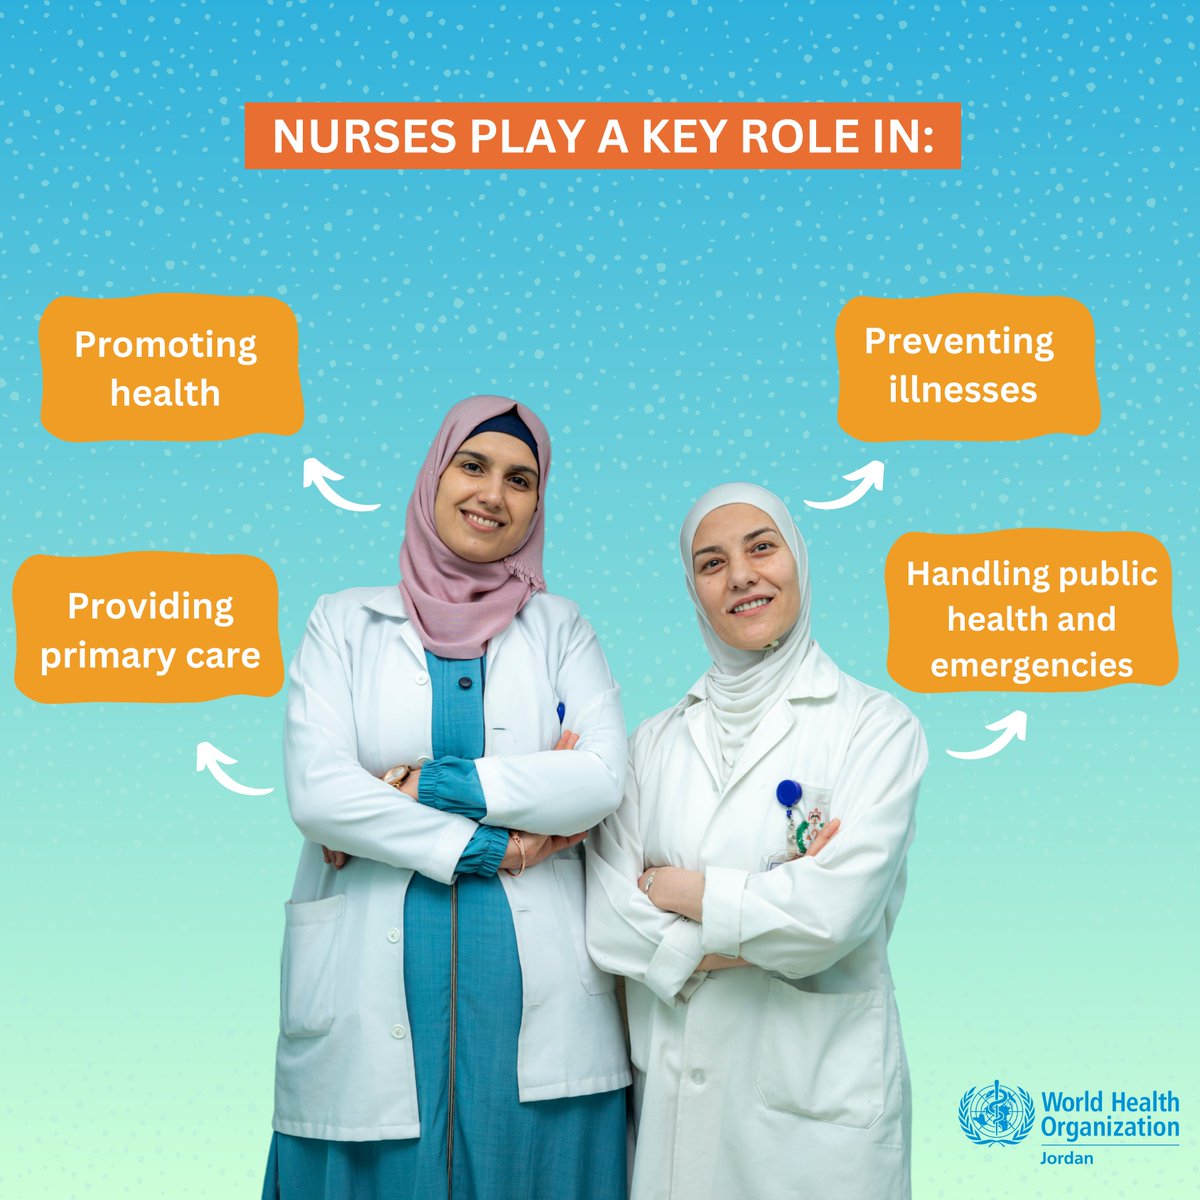 We celebrate International Nurses Day in recognition of the tireless and invaluable contribution of nurses to health care and global health security. #InternationalNursesDay #HealthForAll